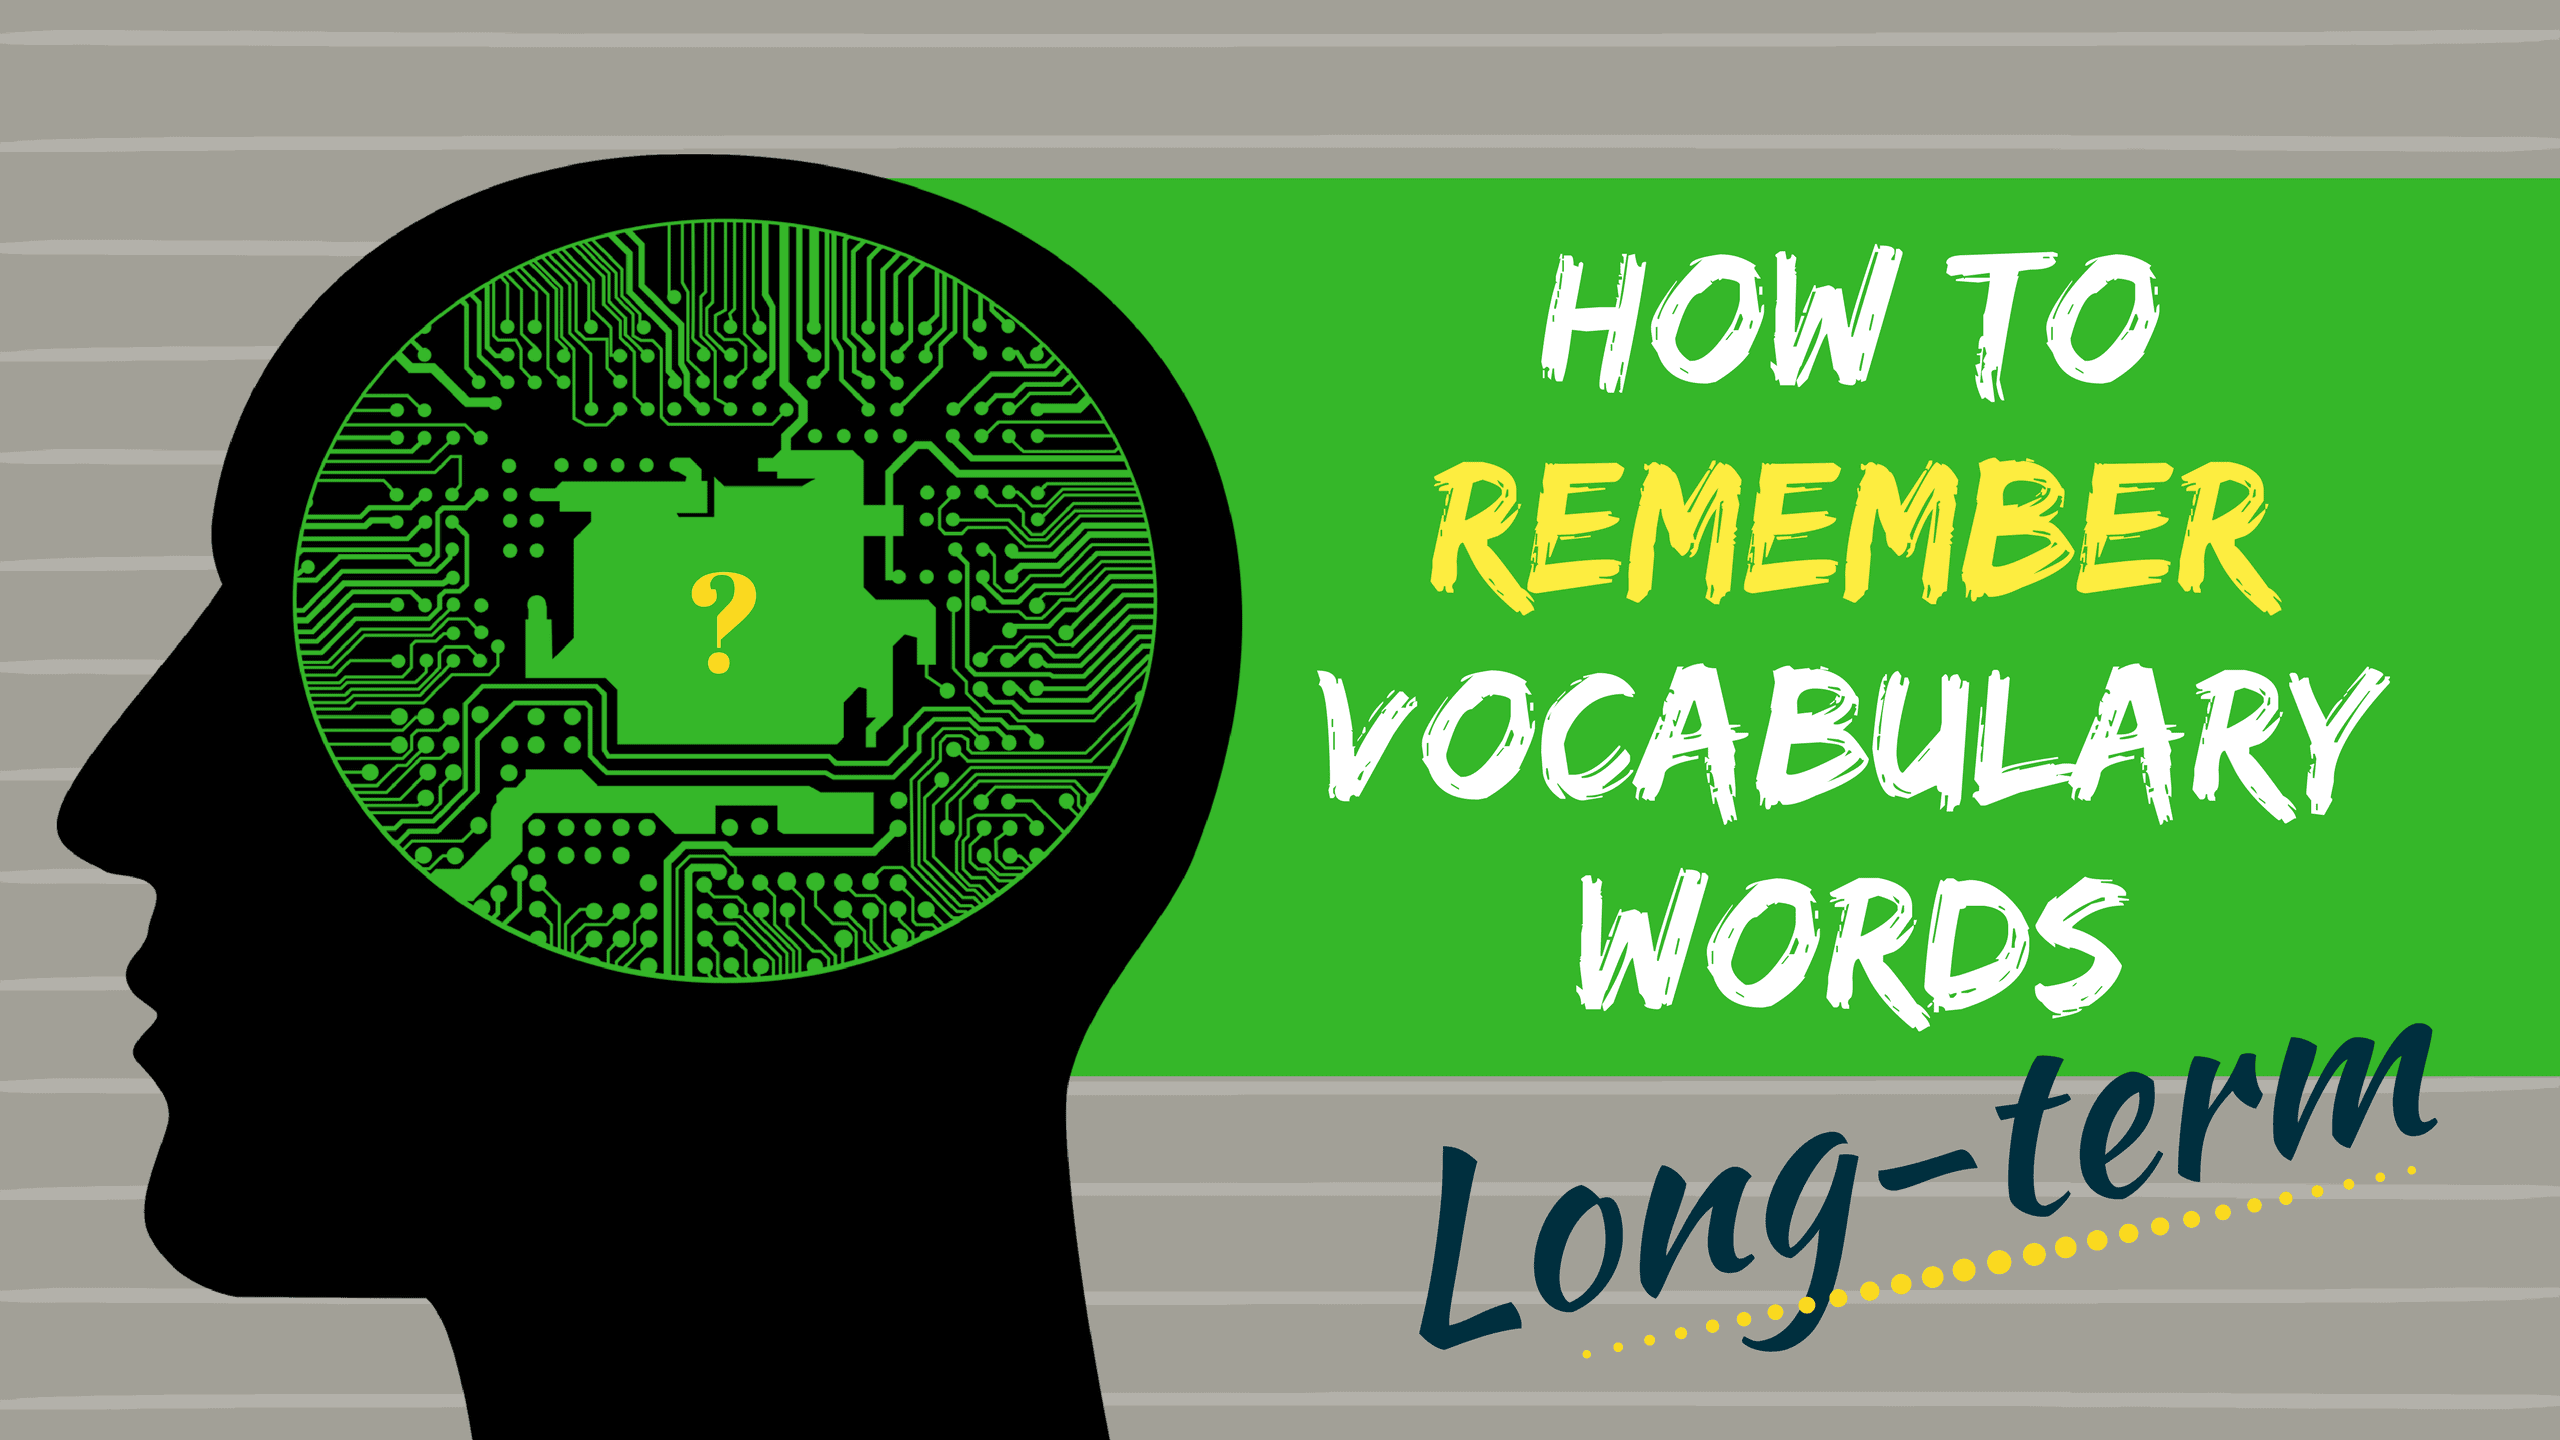 Learning new vocabulary. How to memorize English Words. How to memorize. How to remember English Words. Memorizing Words.